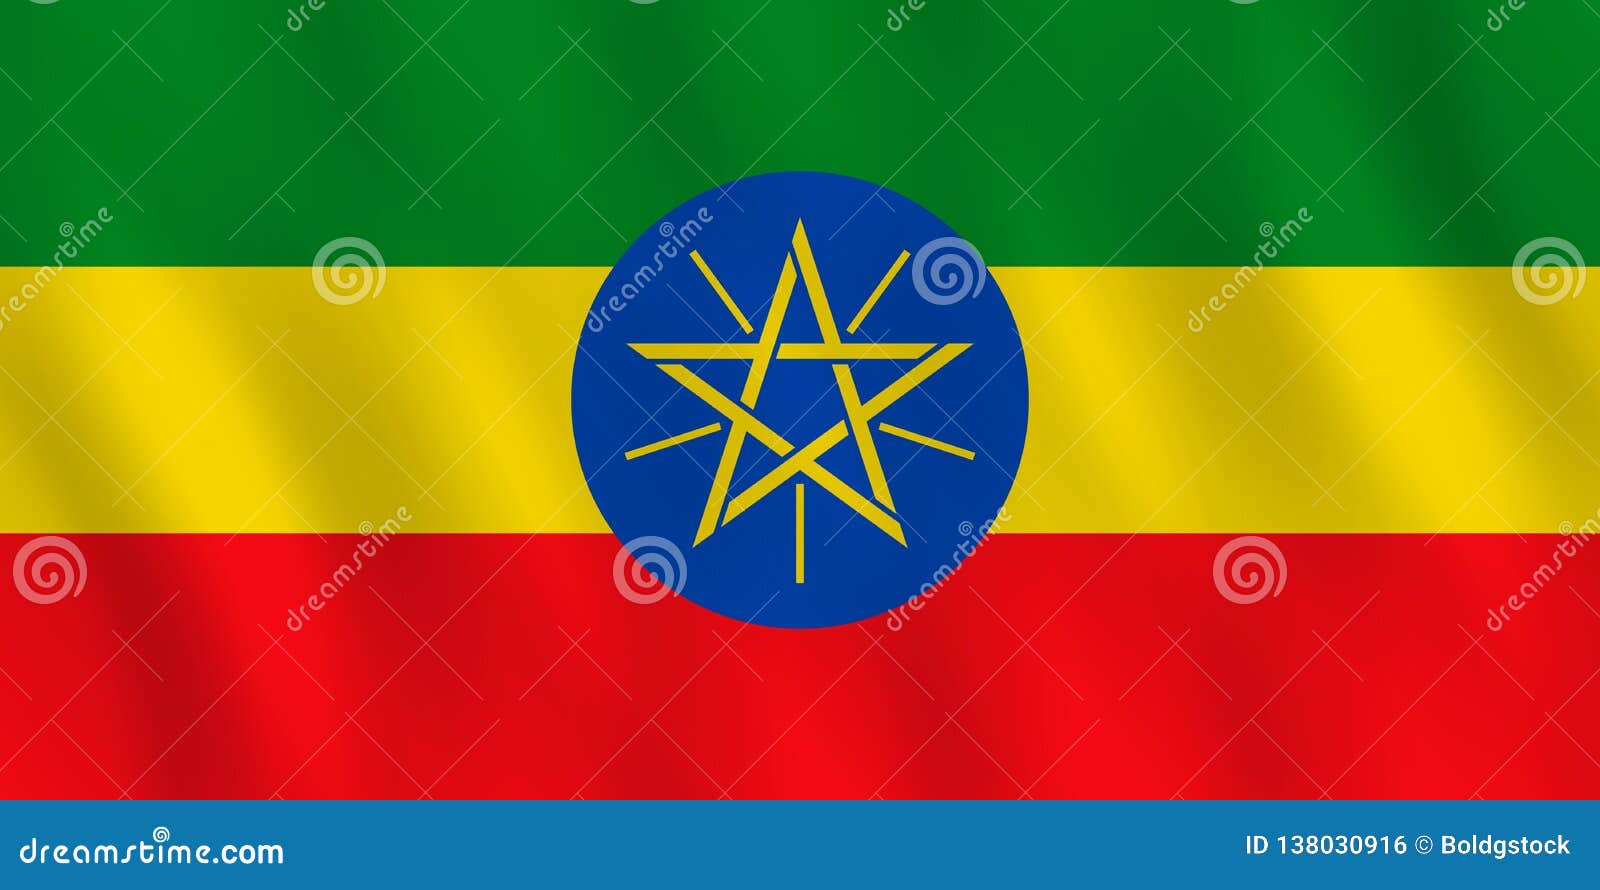 Download Ethiopia Flag With Waving Effect, Official Proportion ...